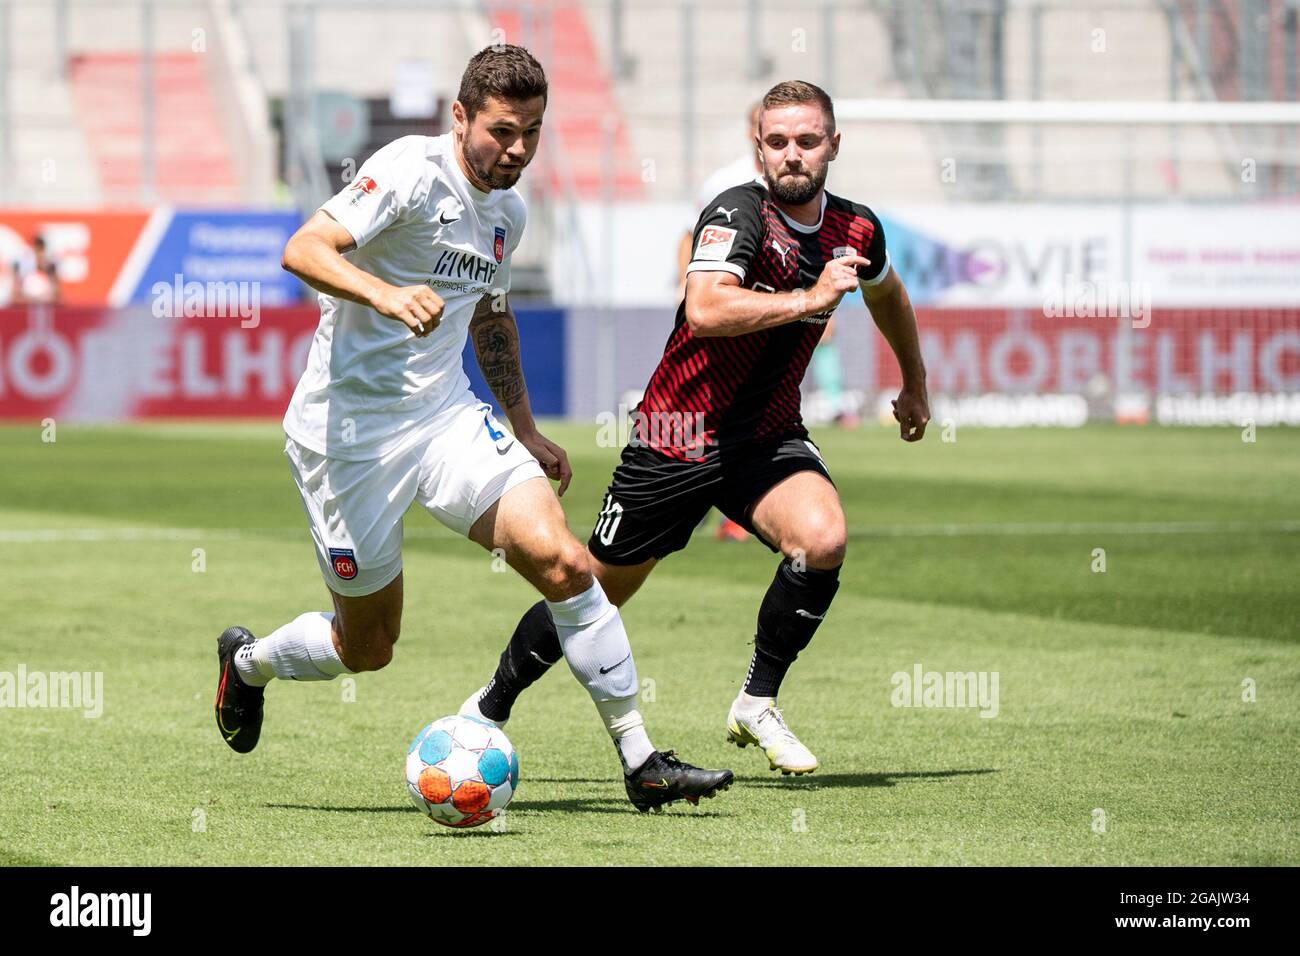 Ingolstadt, Germany. 31st July, 2021. Football: 2. Bundesliga, FC Ingolstadt 04 - 1. FC Heidenheim, Matchday 2 at Audi Sportpark. Marnon Busch of Heidenheim (l) and Marc Stendera of Ingolstadt in a duel for the ball. Credit: Matthias Balk/dpa - IMPORTANT NOTE: In accordance with the regulations of the DFL Deutsche Fußball Liga and/or the DFB Deutscher Fußball-Bund, it is prohibited to use or have used photographs taken in the stadium and/or of the match in the form of sequence pictures and/or video-like photo series./dpa/Alamy Live News Stock Photo